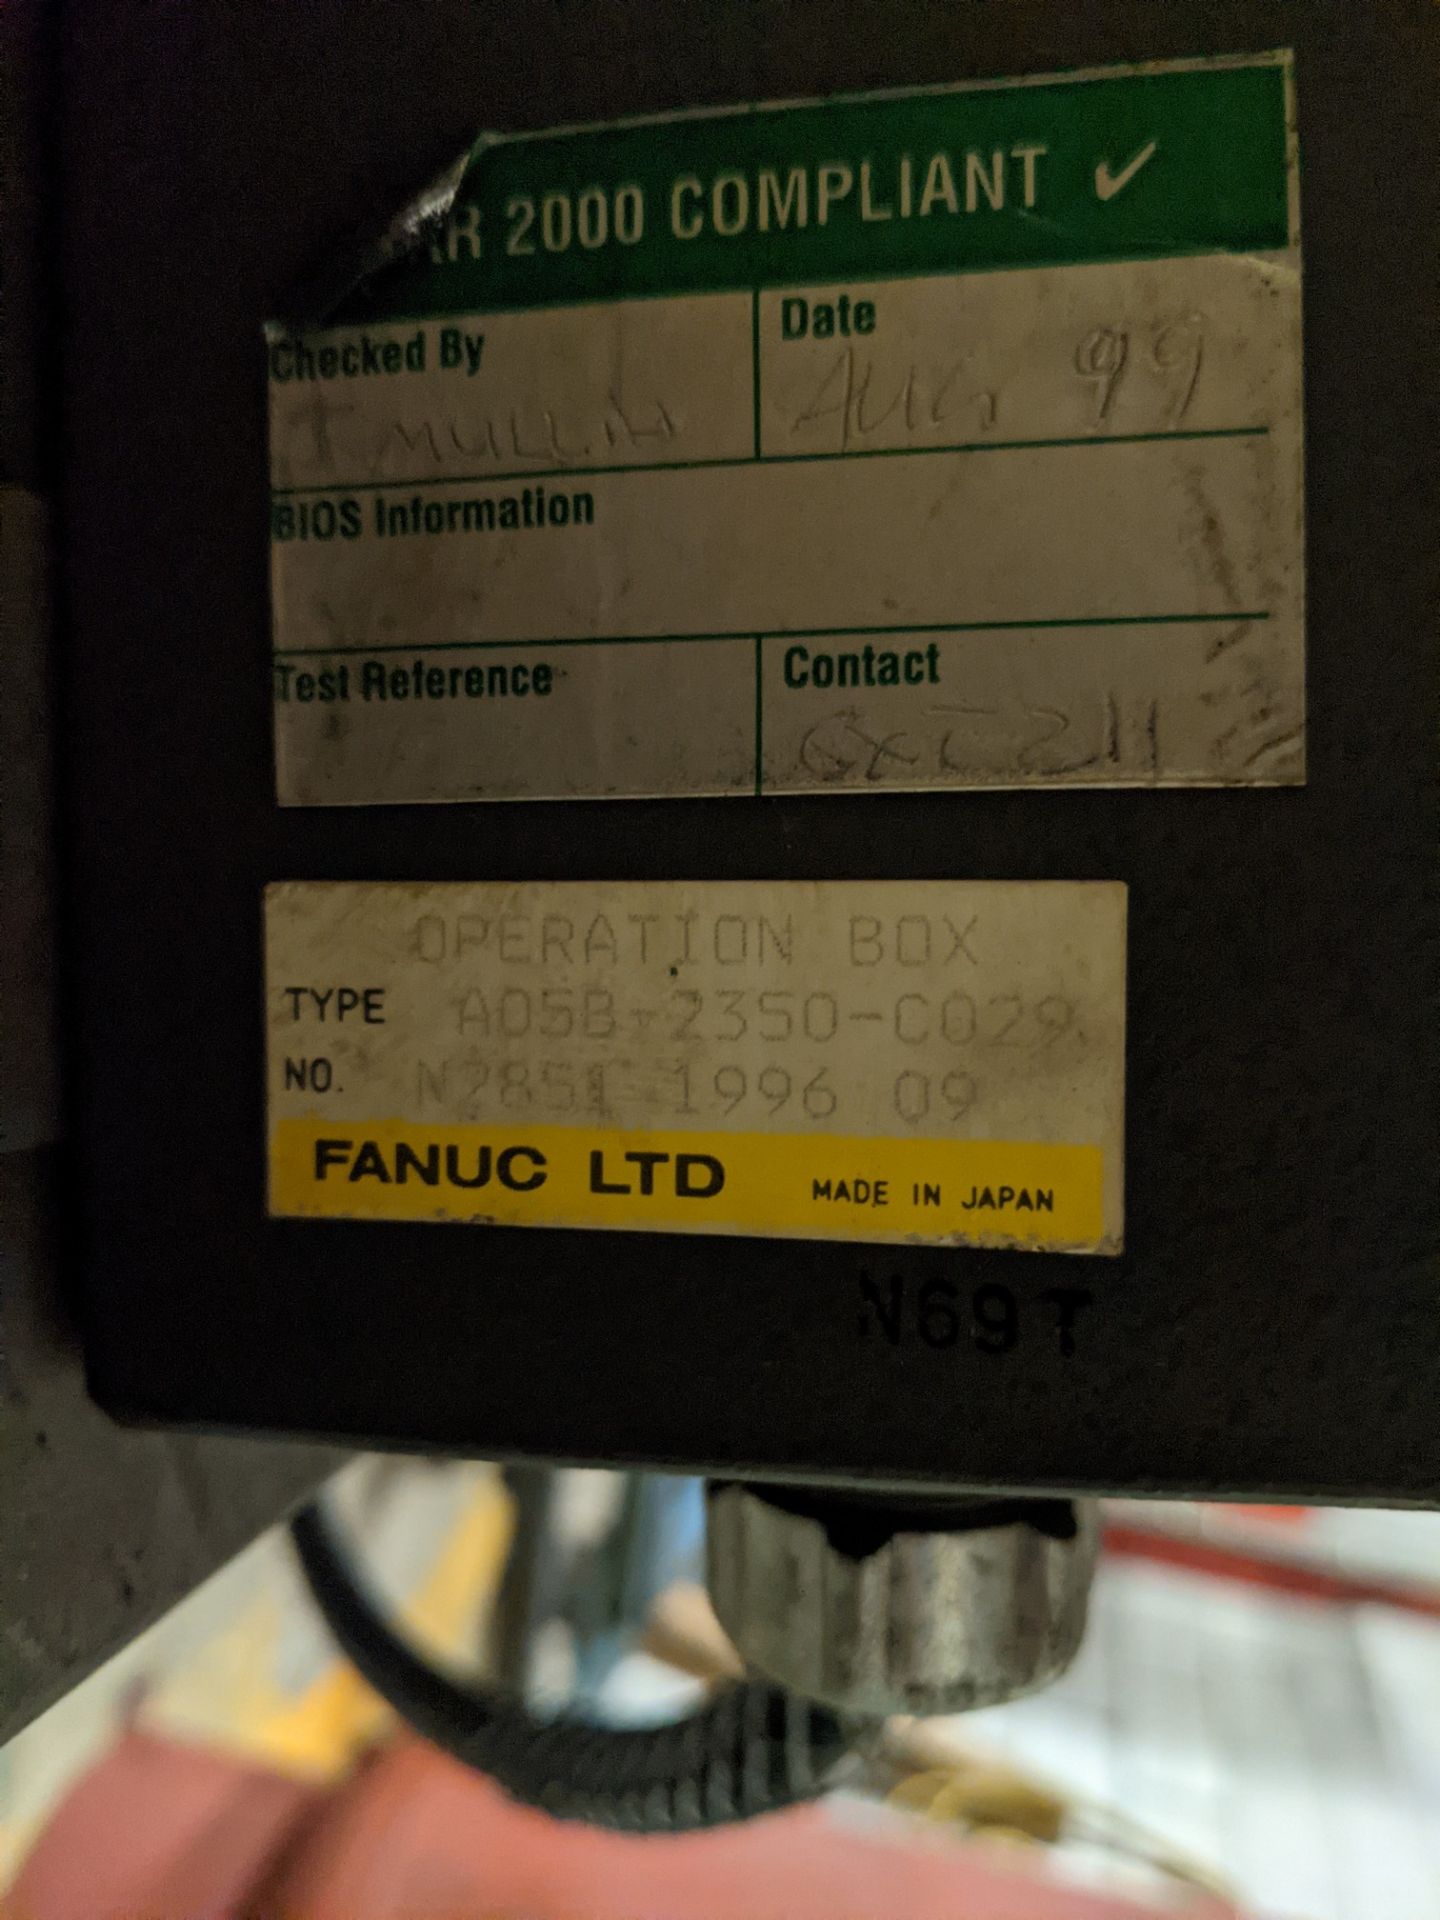 FANUC S-420IF ROBOT W/ FANUC SYSTEM R-J2 CONTROLLER, TYPE A05B-2350-B003, S/N E96902609 W/ PENDANT - Image 6 of 10